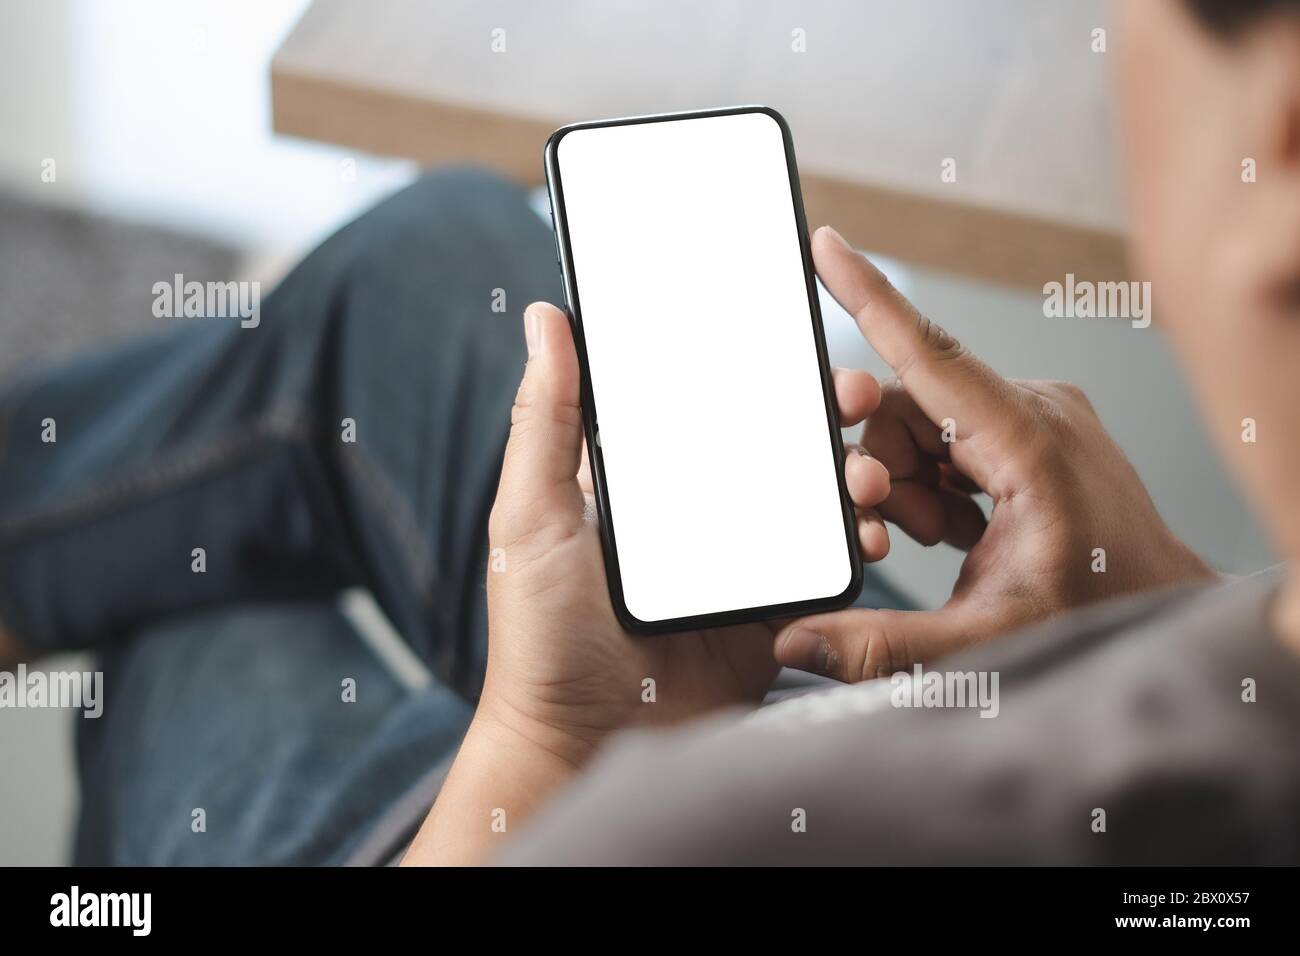 Top view Mockup hand using a smartphone Cell Phone With Blank Screen Stock Photo - Alamy